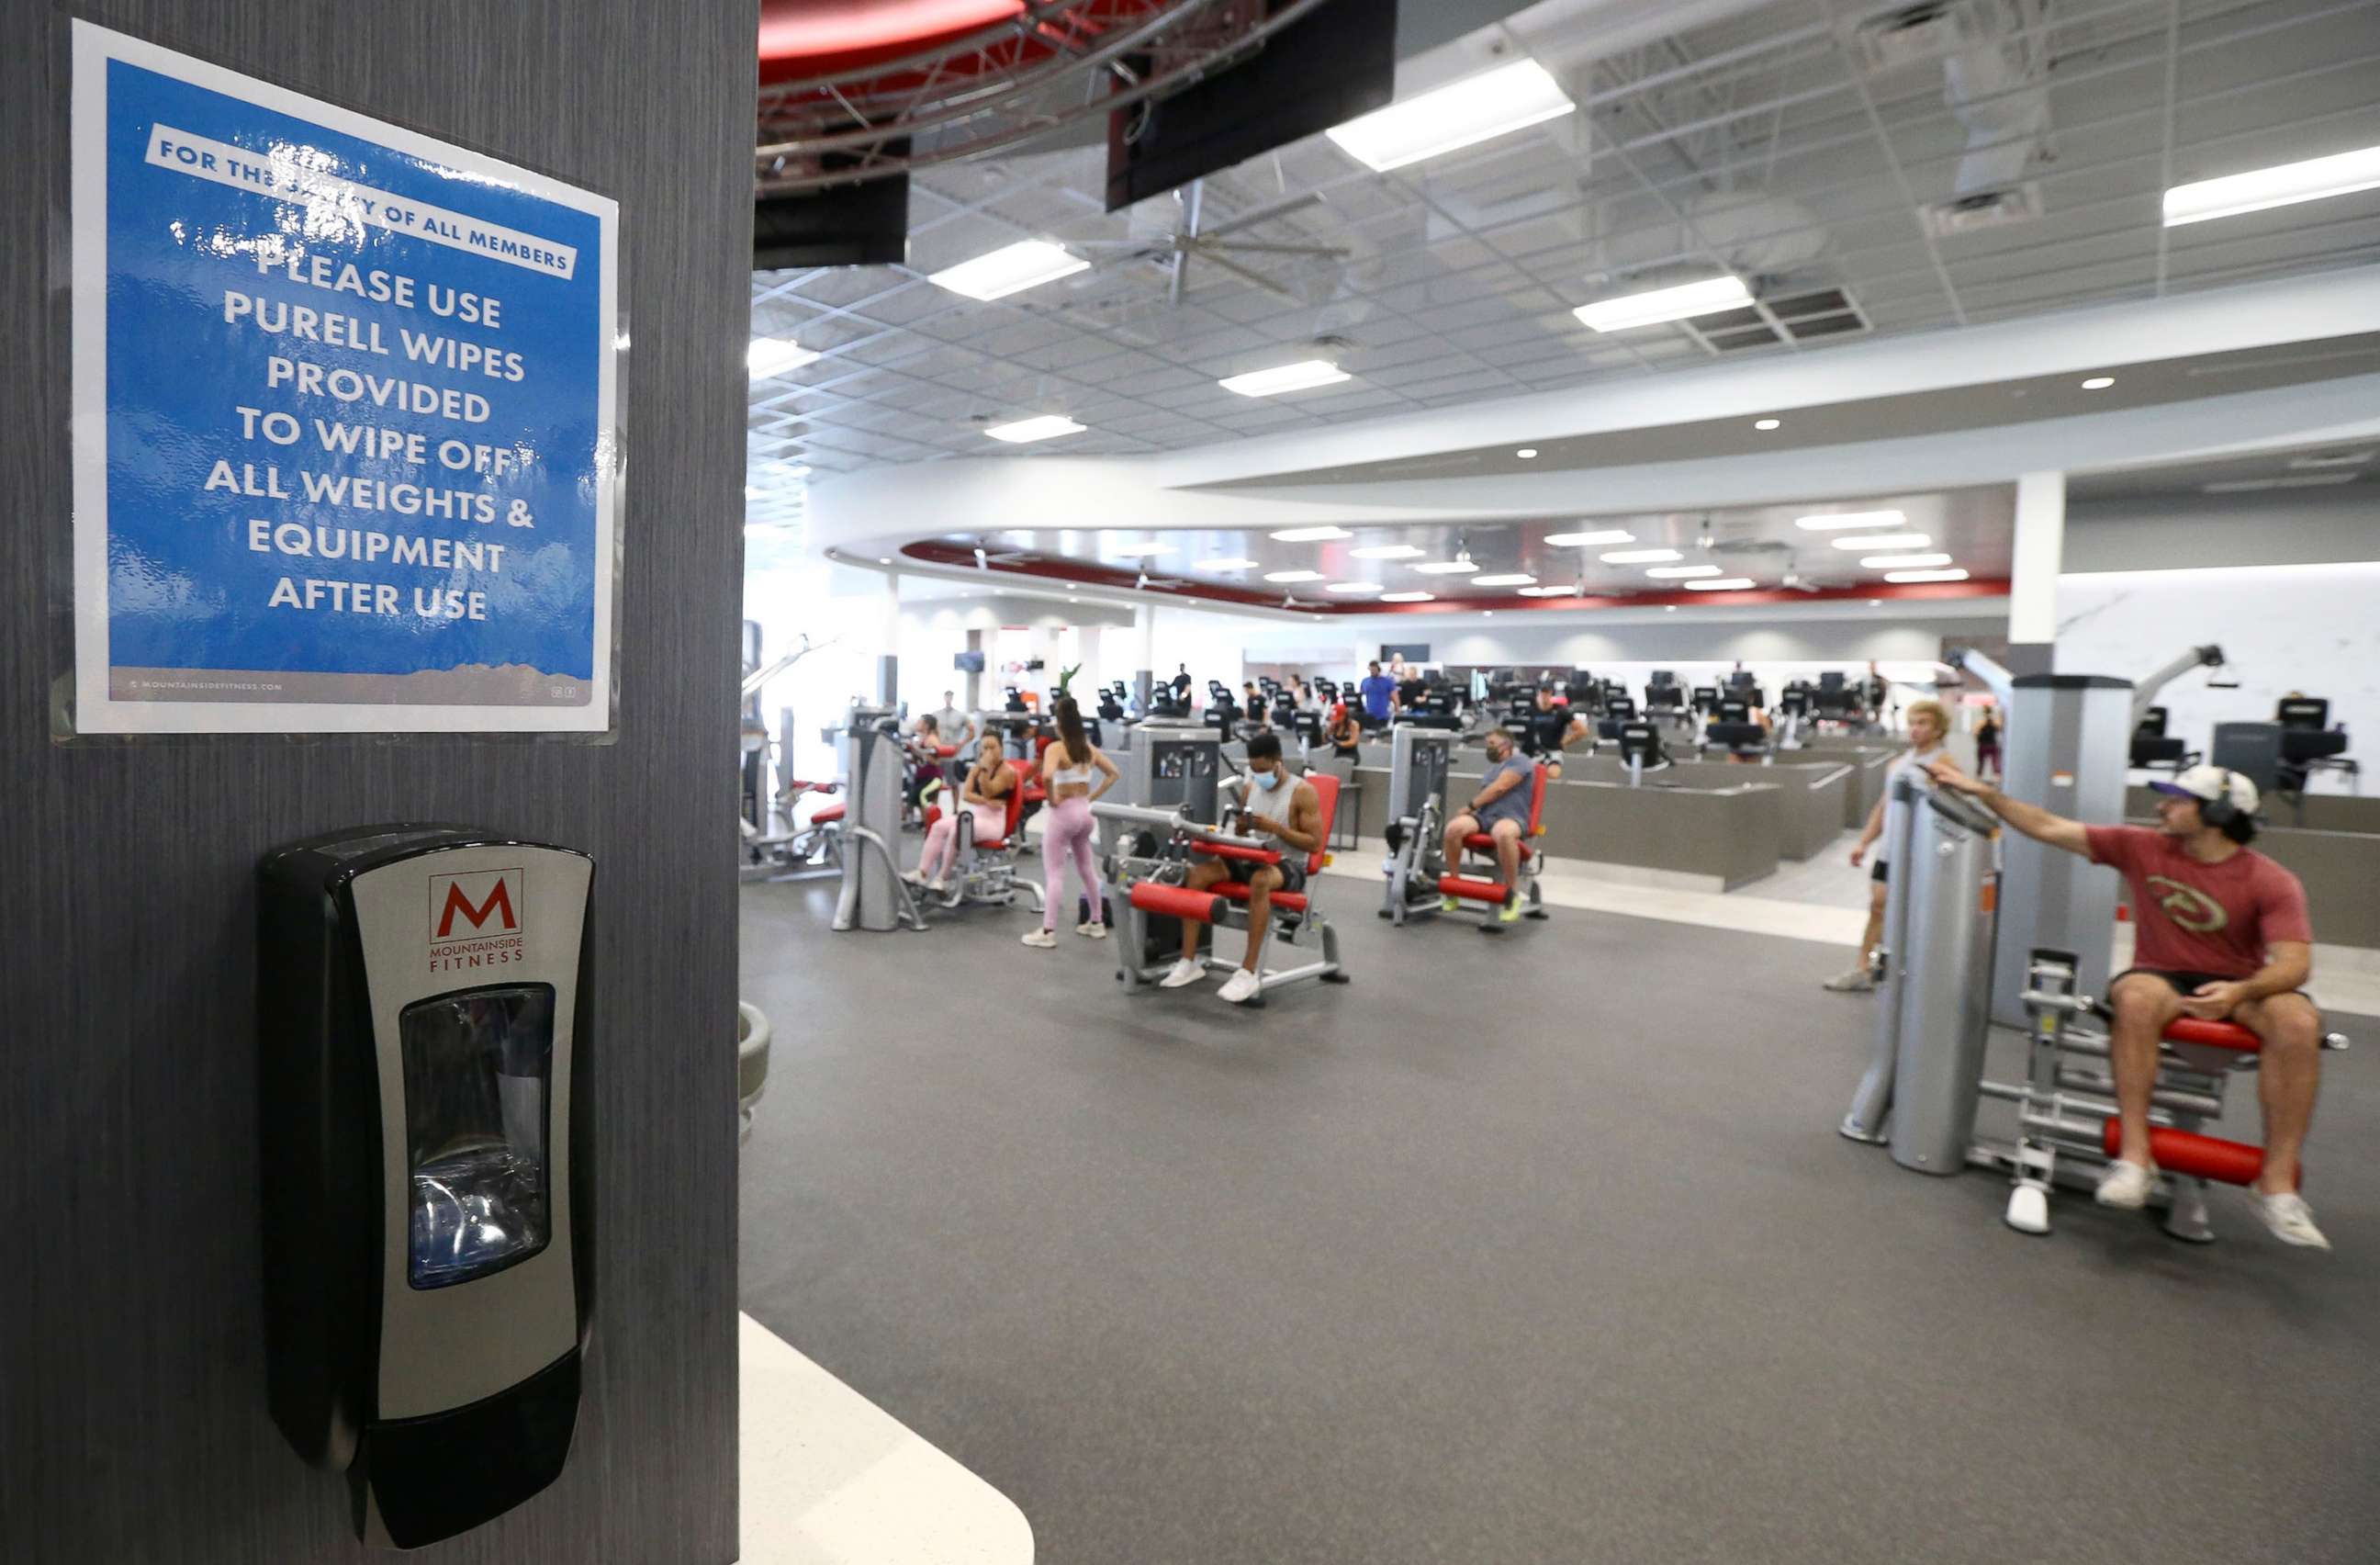 PHOTO: Clients work out at Mountainside Fitness as the facility remains open even as Arizona Gov. Doug Ducey has issued an executive order for all gyms to close due to the surge in coronavirus cases in Arizona, July 2, 2020, in Phoenix.